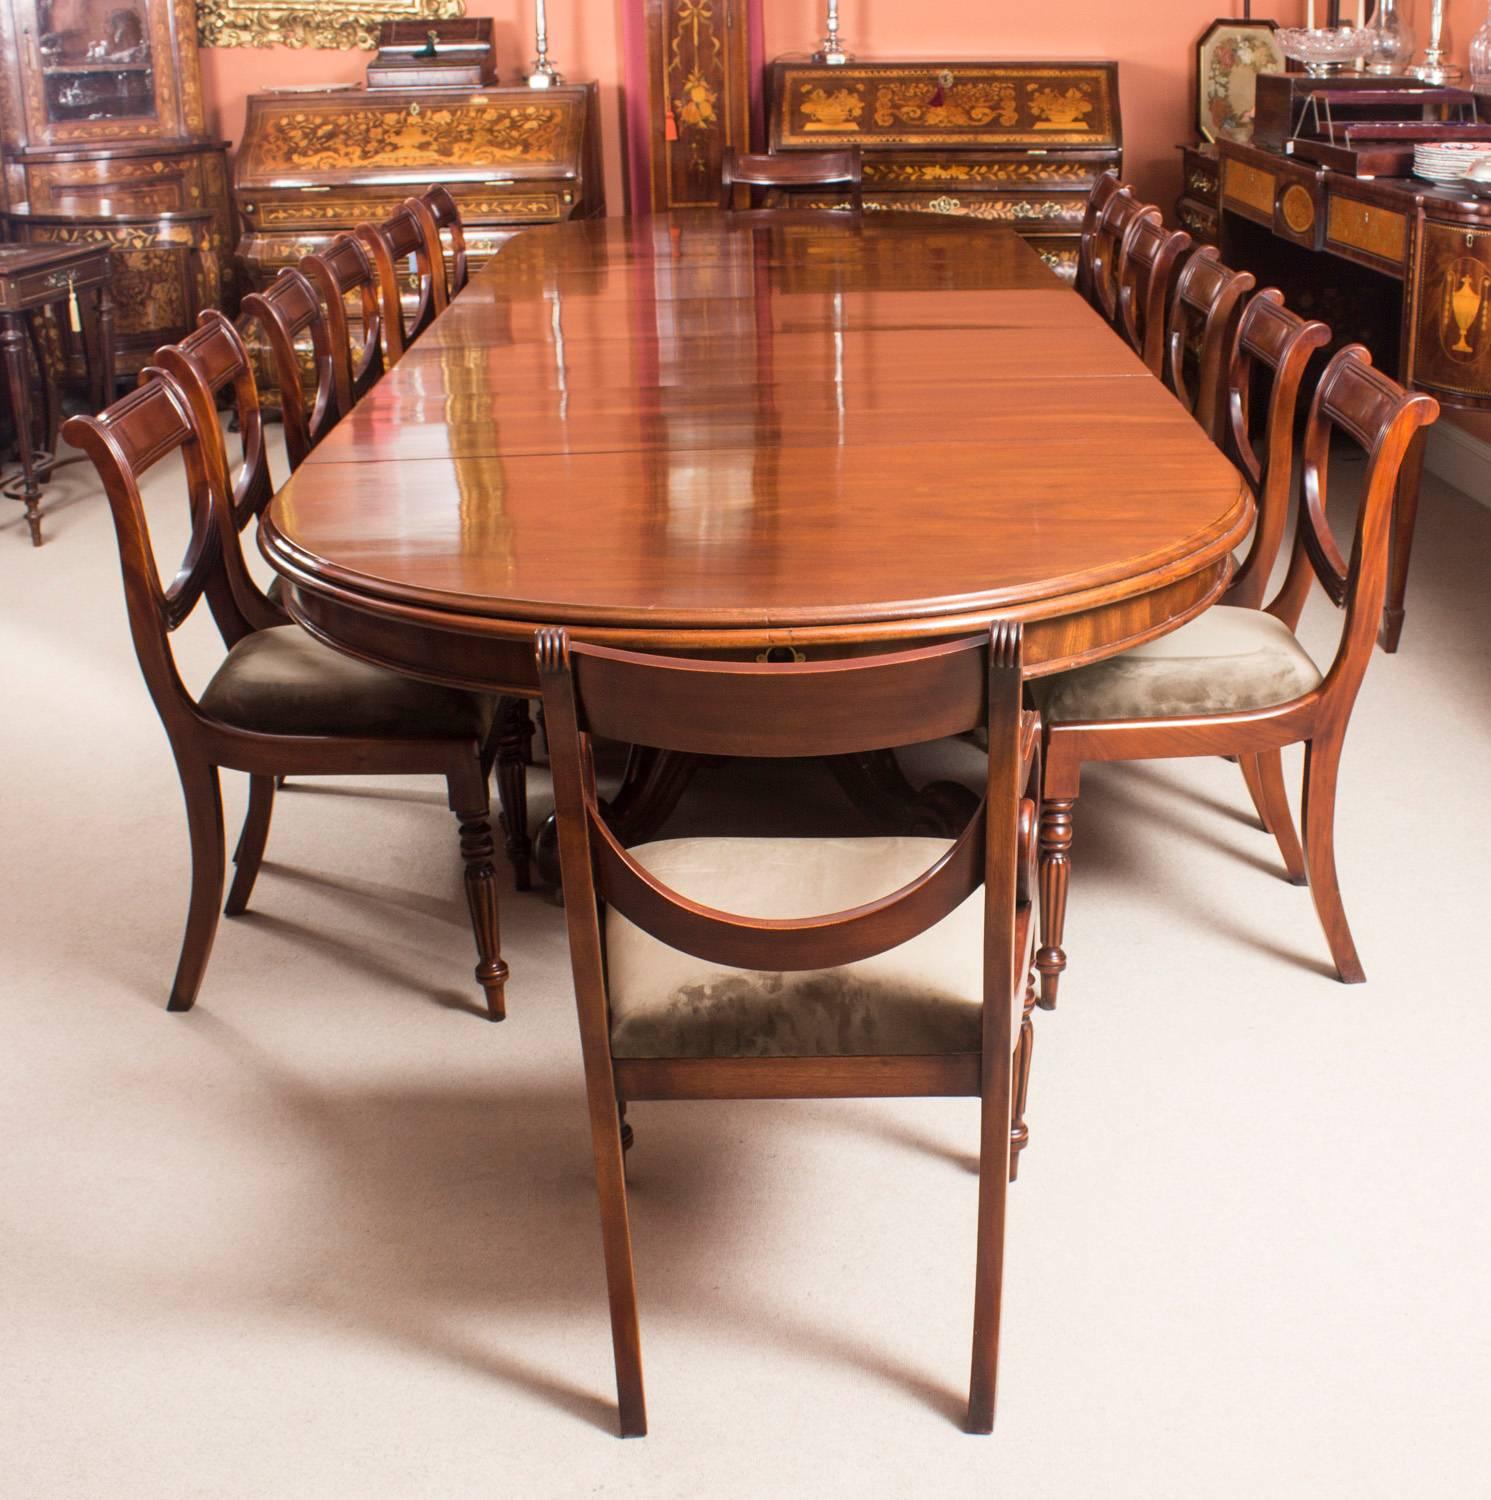 A fantastic and rare antique early Victorian dining set, comprising a 14ft dining table, circa 1865 in date and 14 bespoke mahogany dining chairs.
There is no mistaking the style and sophisticated design of this exquisite and rare English antique